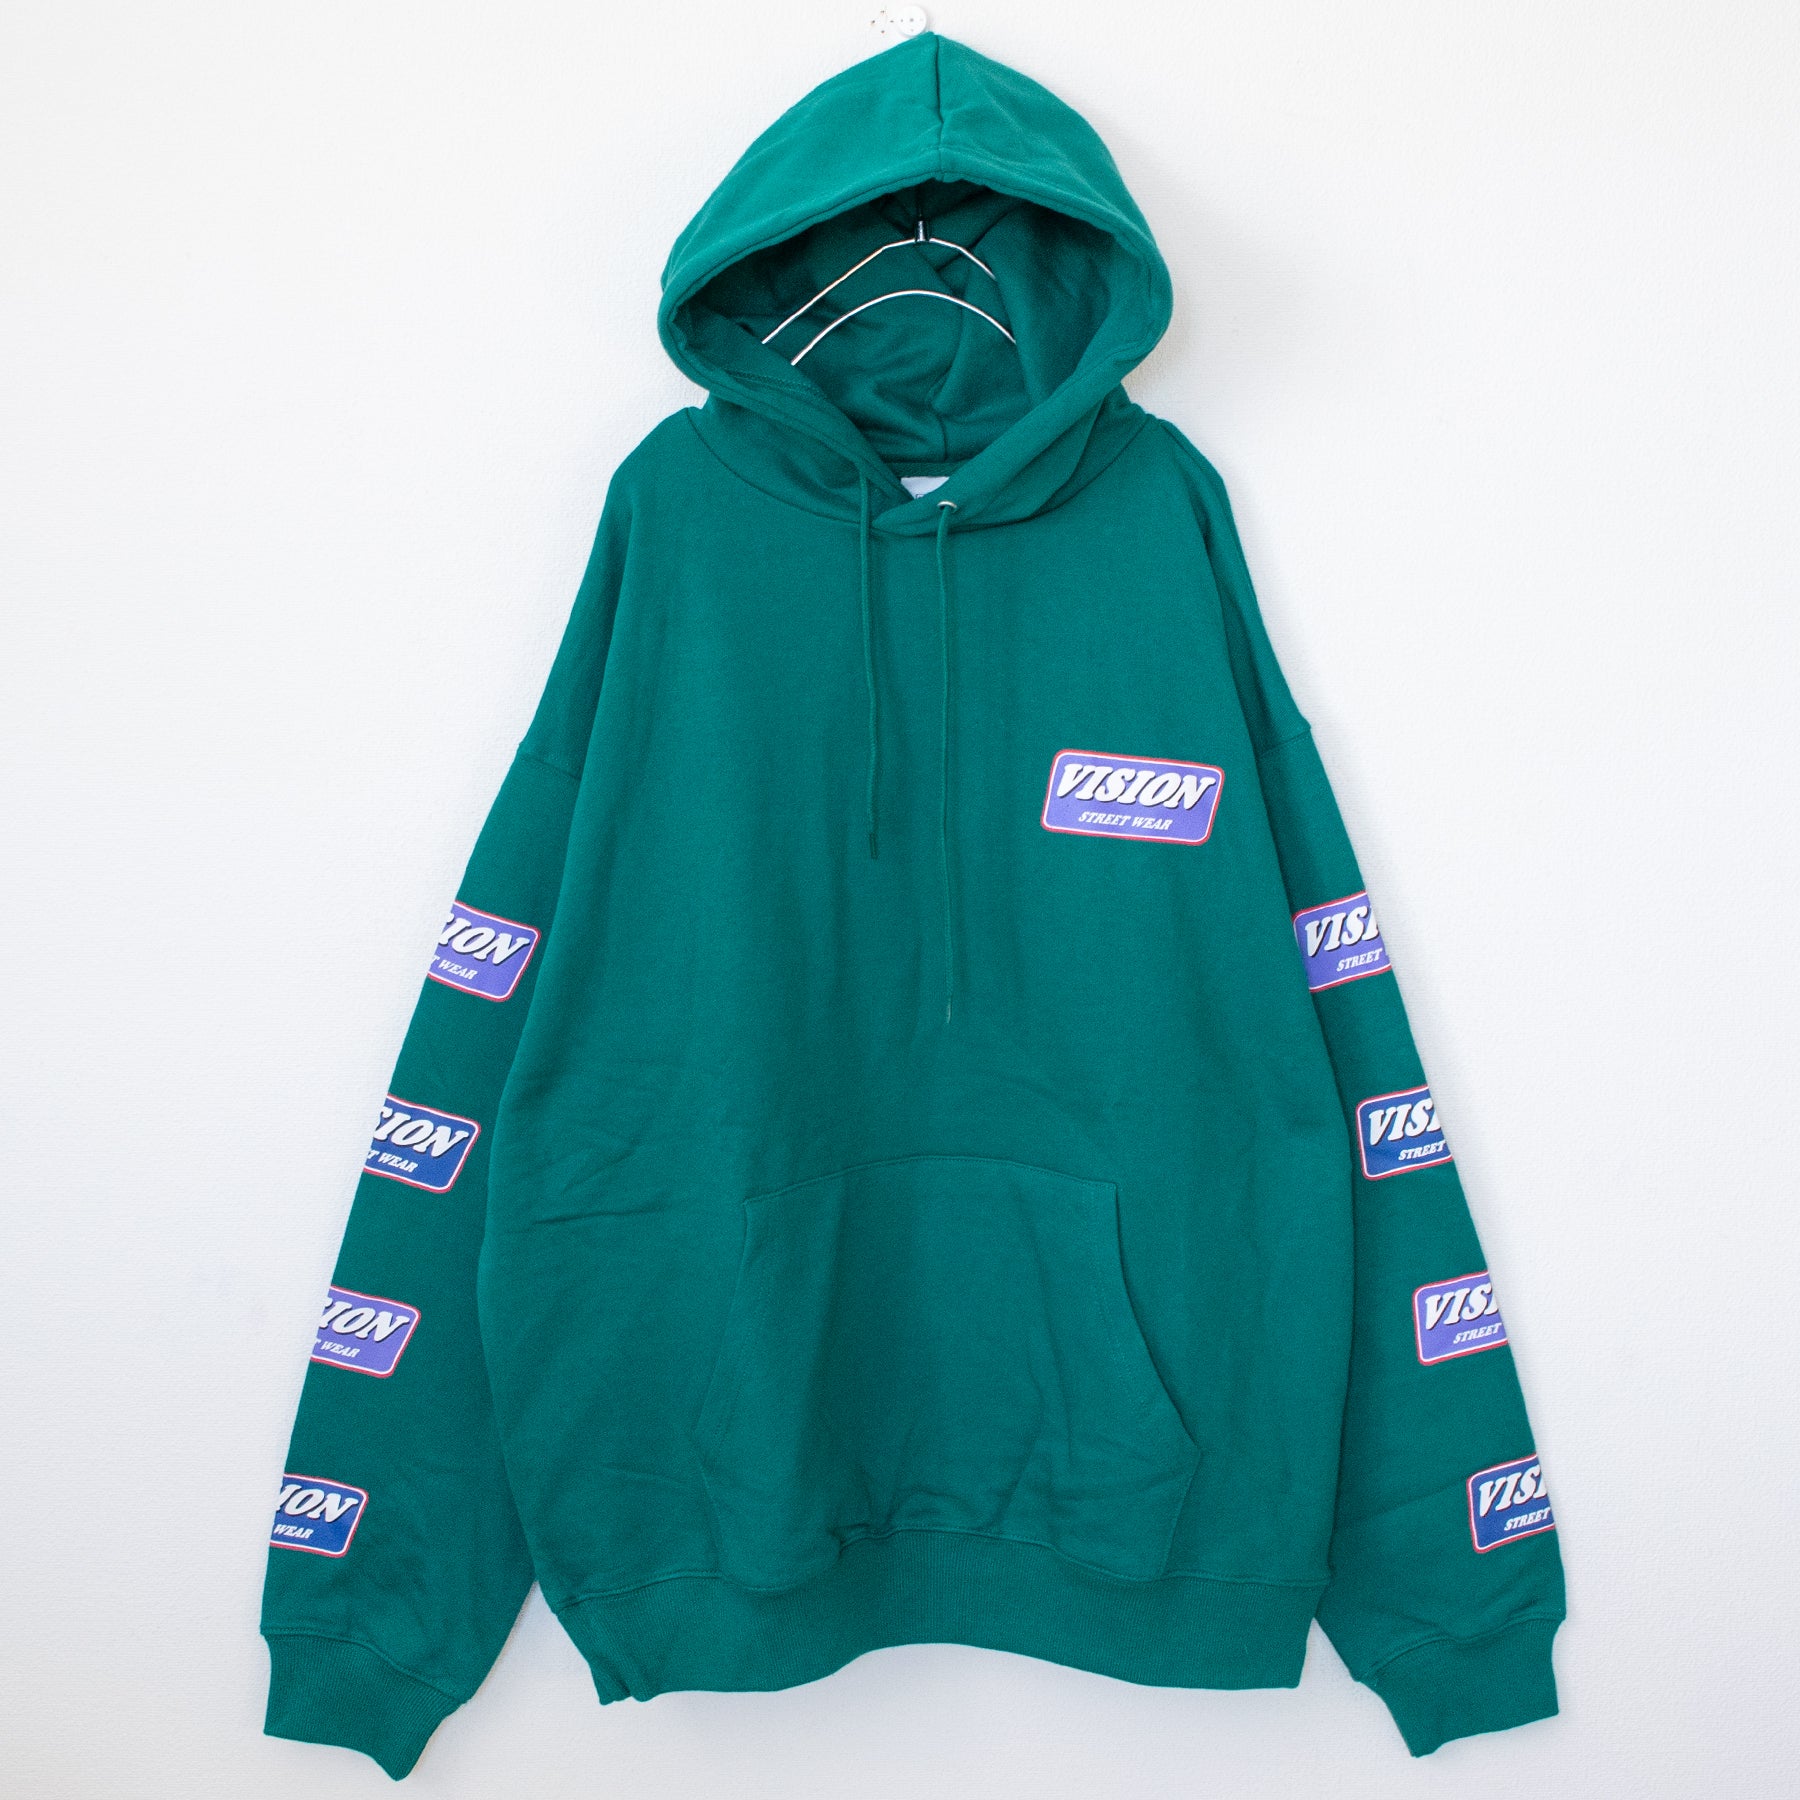 VISION STREET WEAR Sleeve Logo Pullover Hoodie - YOUAREMYPOISON